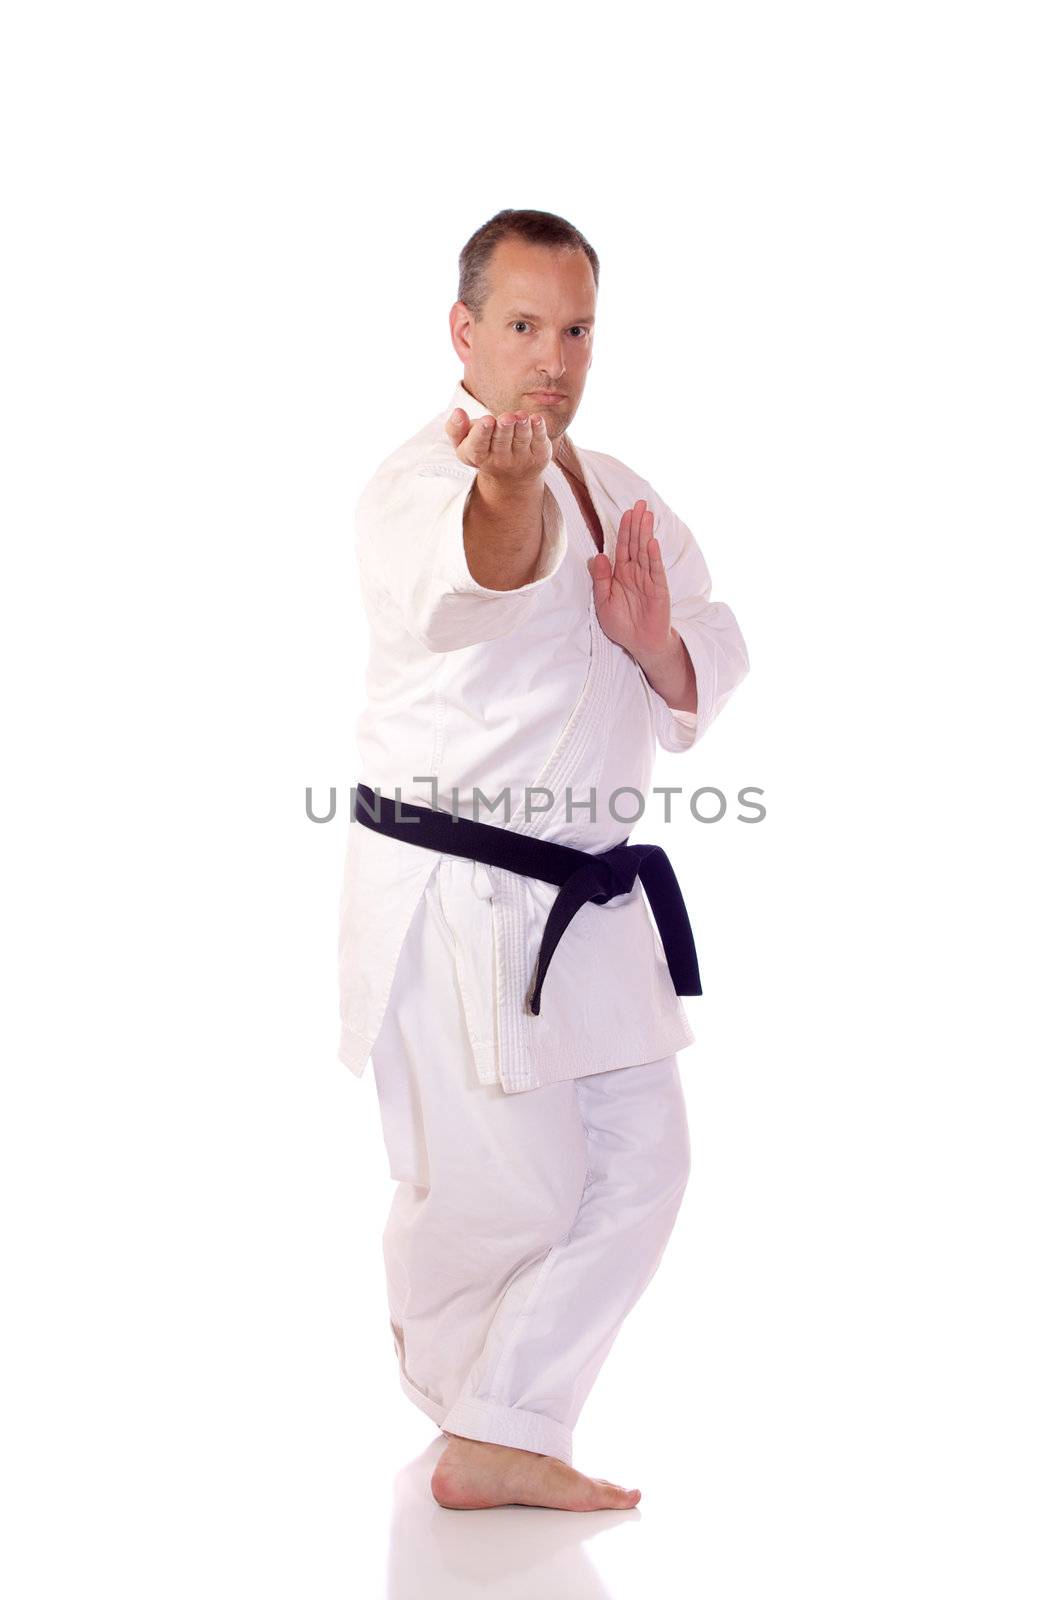 Man in traditional clothing doing karate